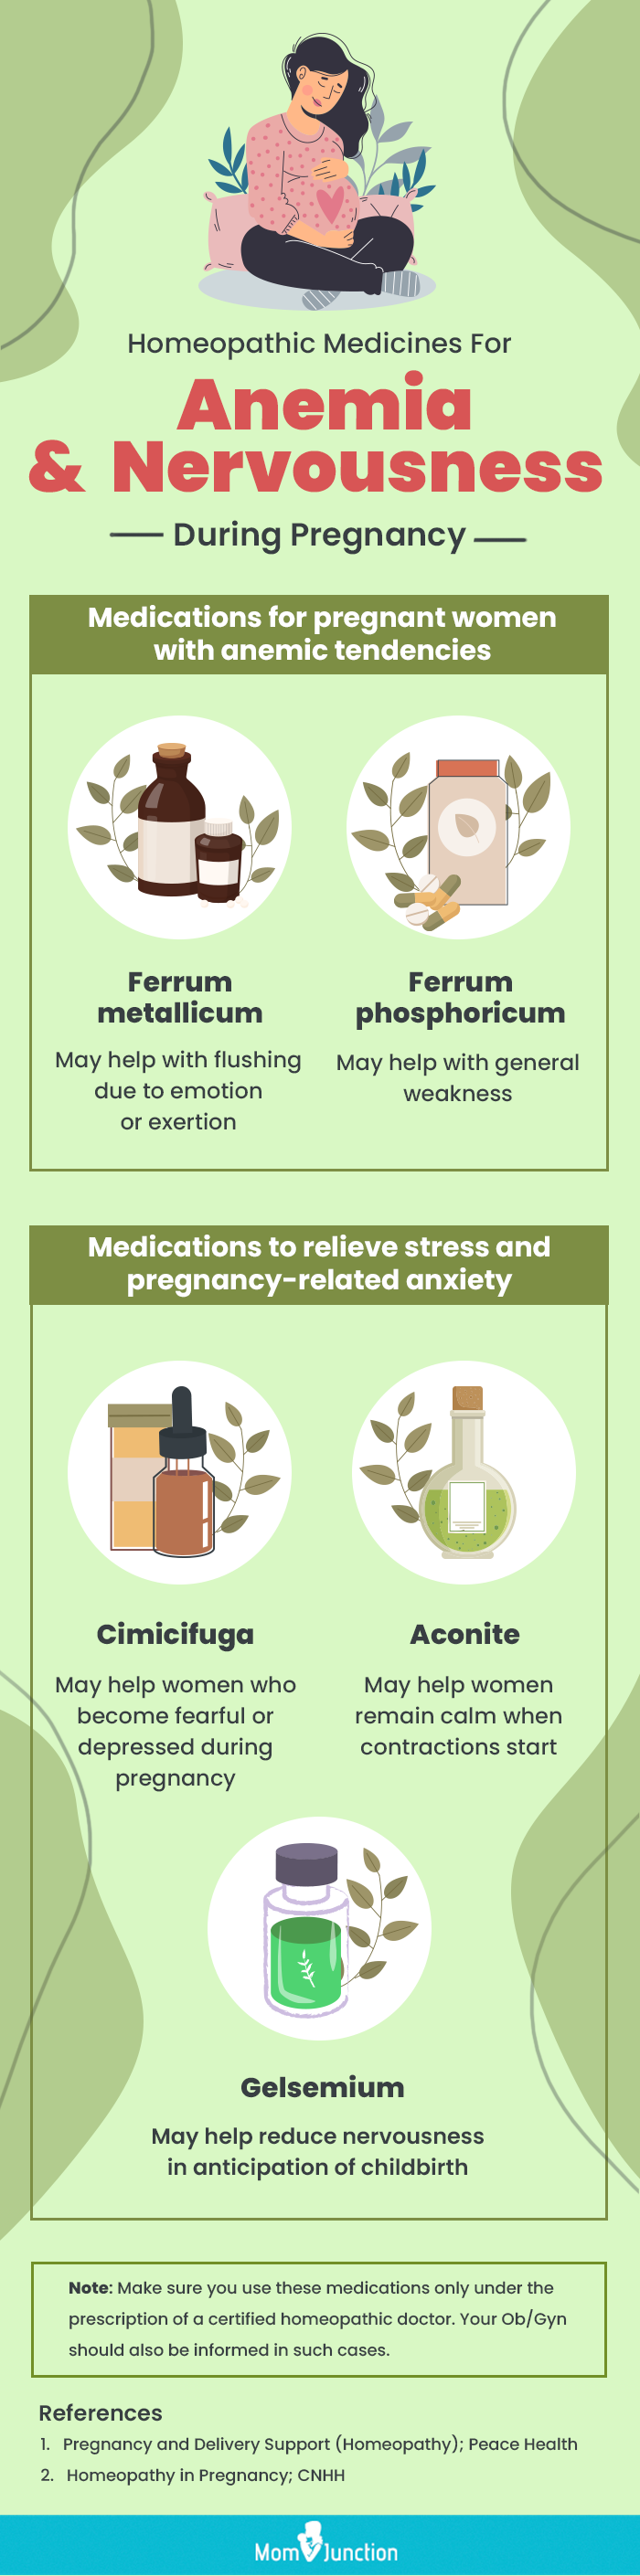 homeopathic medicines during pregnancy [infographic]